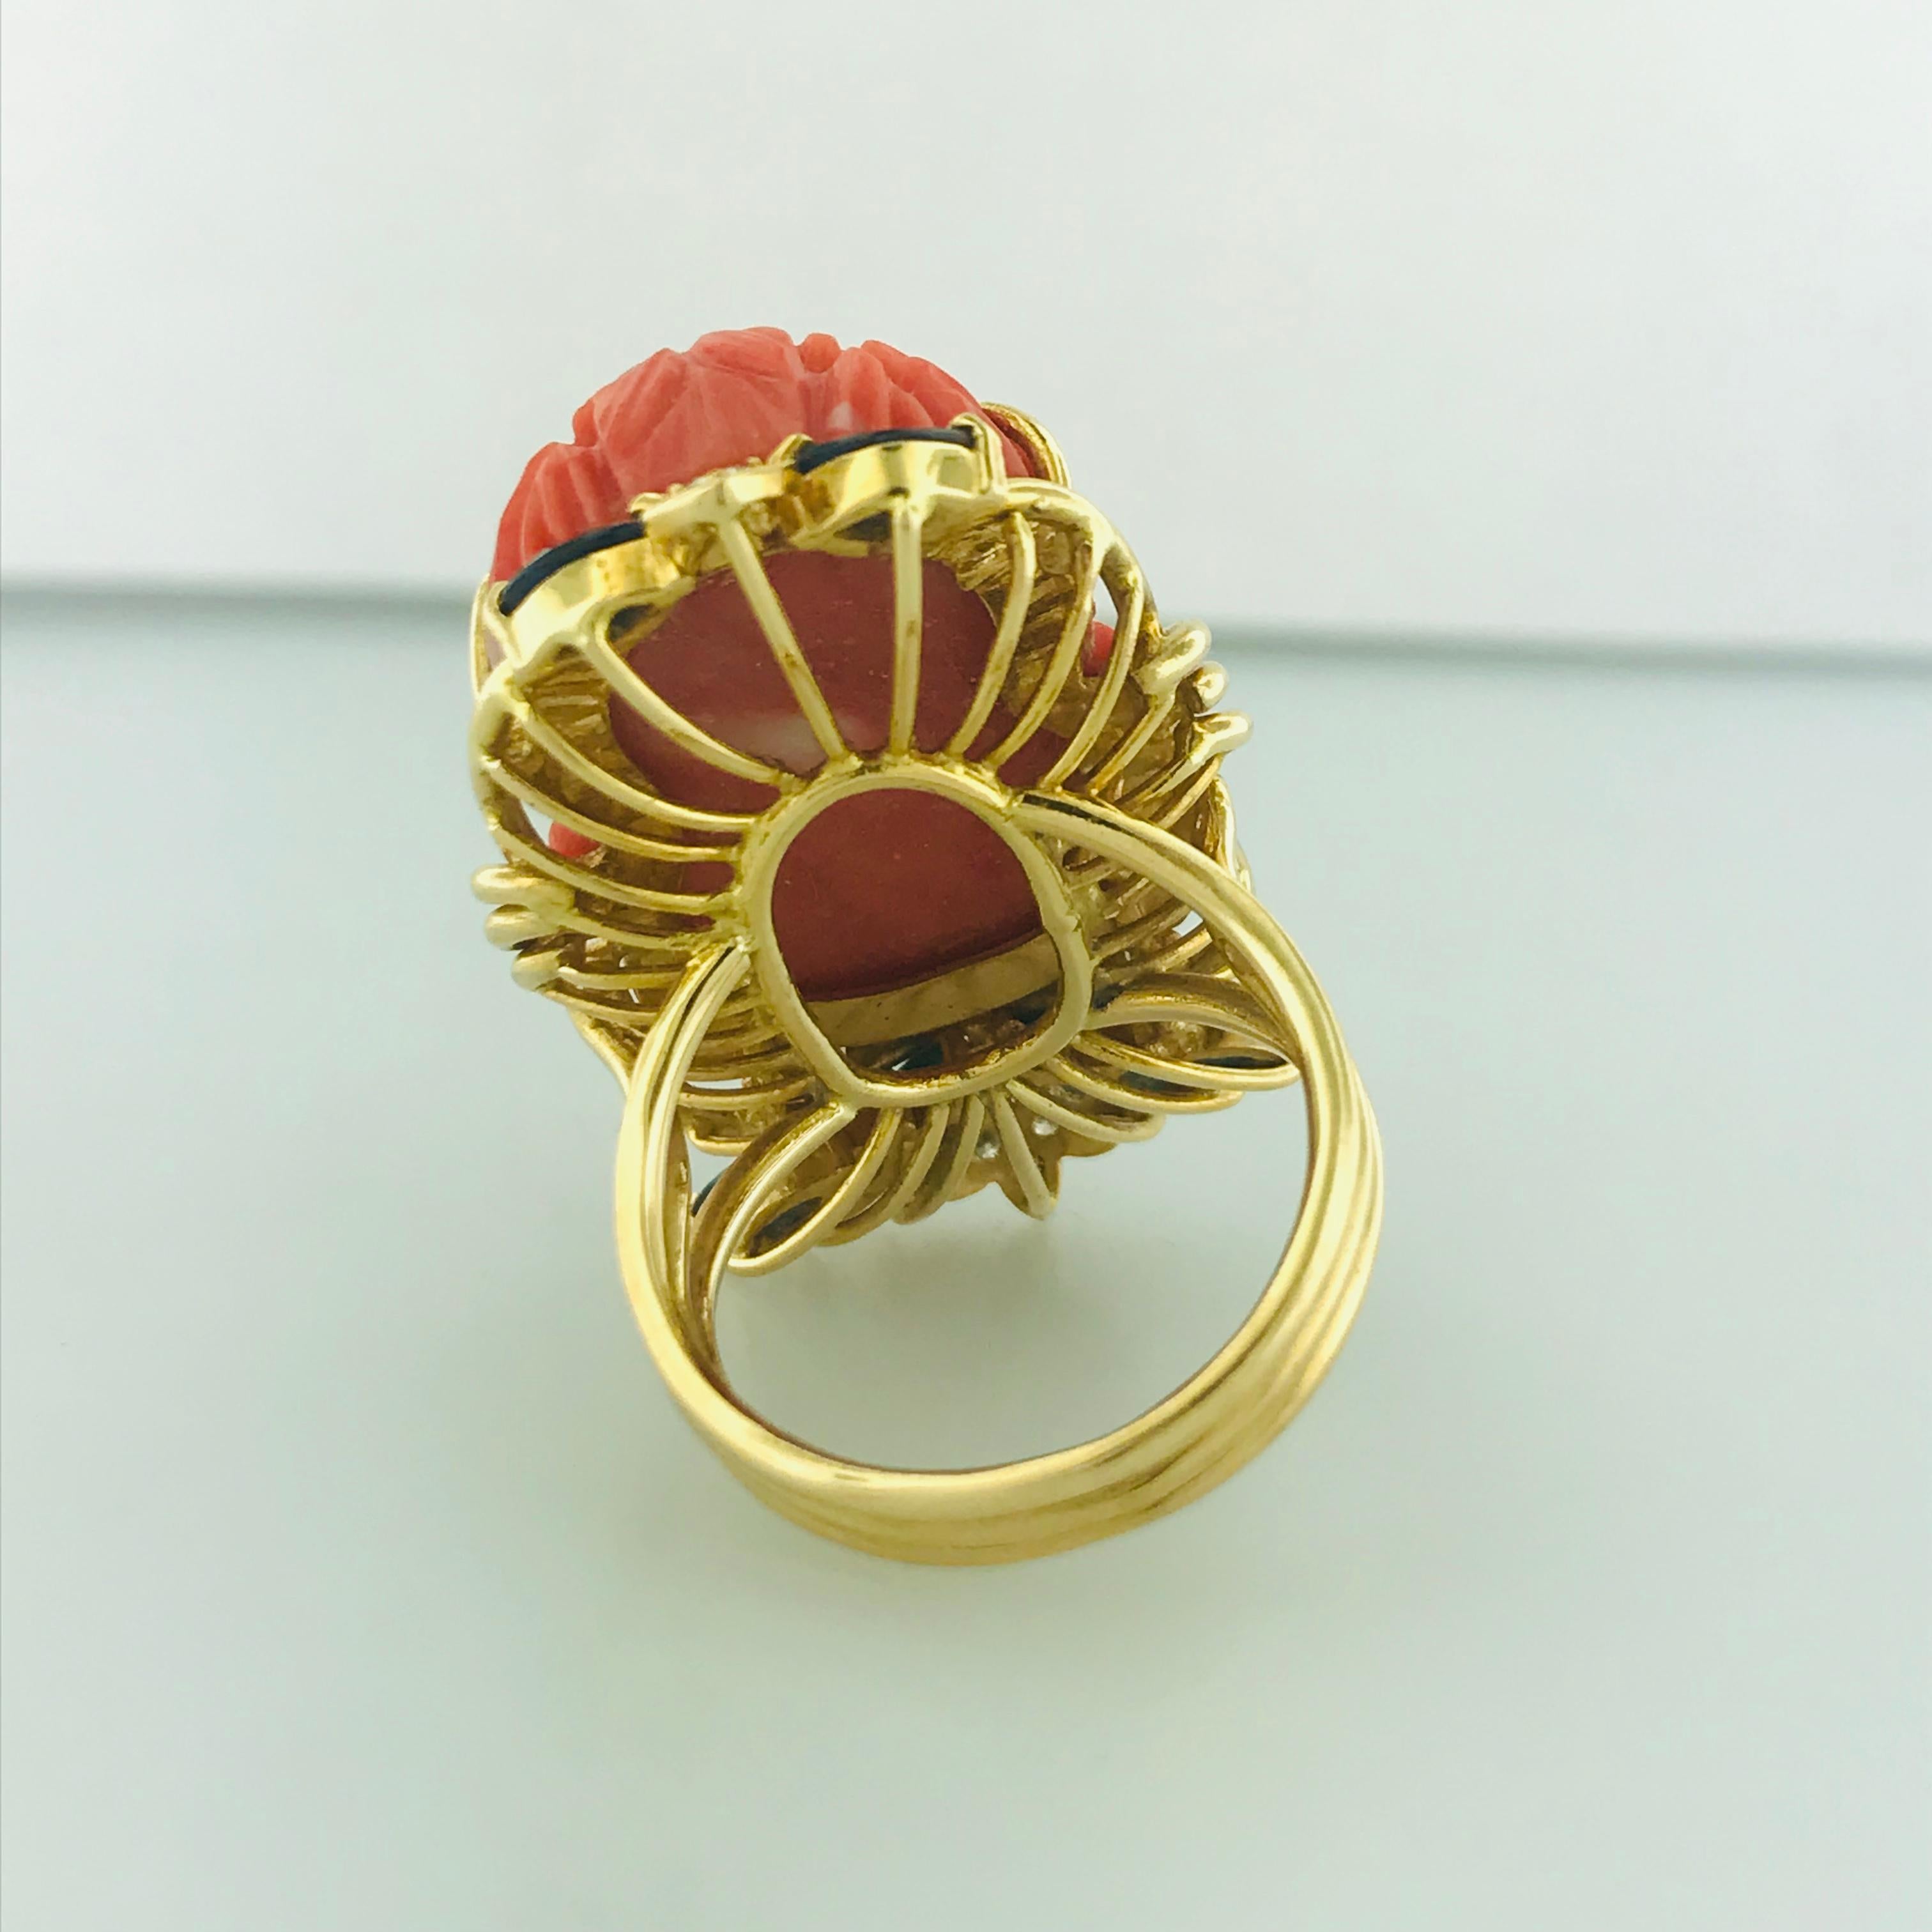 Mixed Cut Estate Coral Buddha, Sapphire and Diamond Ring in 18 Karat Yellow Gold